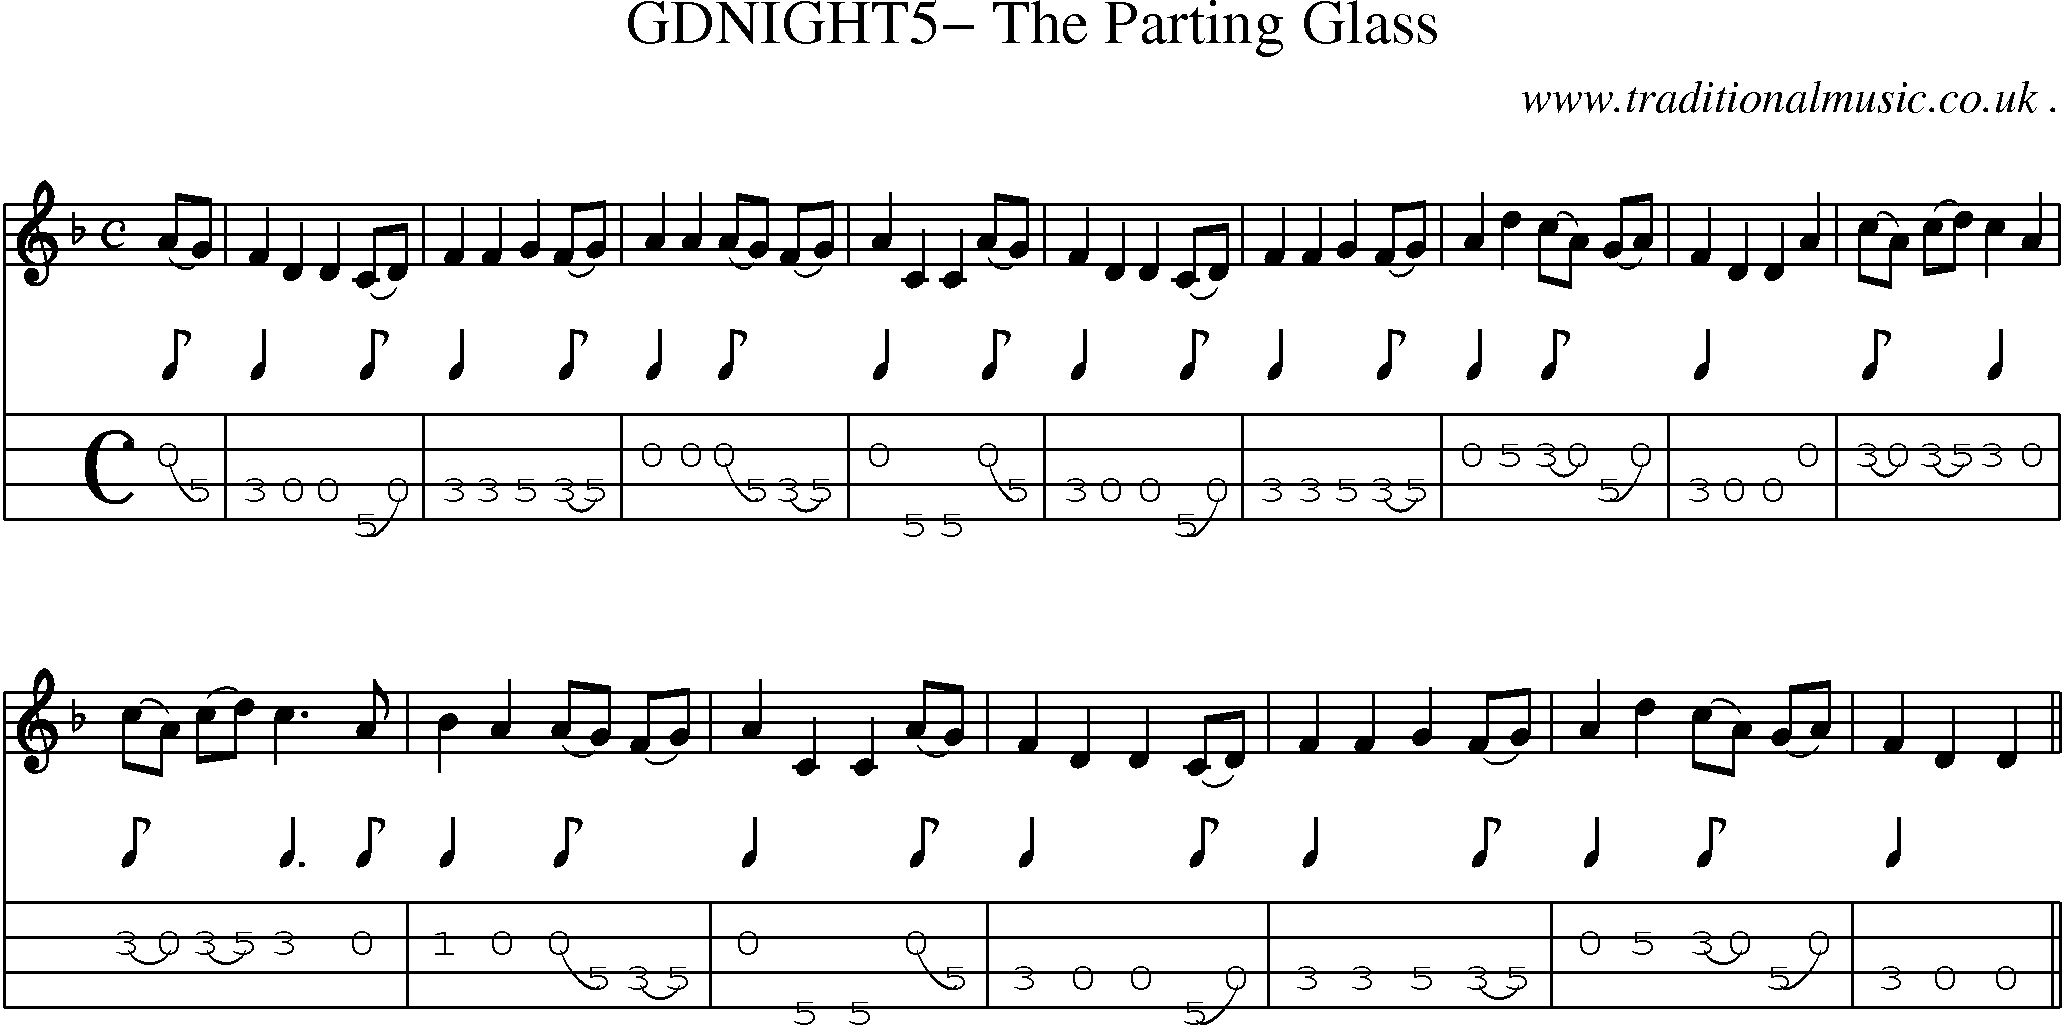 Sheet-Music and Mandolin Tabs for Gdnight5 The Parting Glass